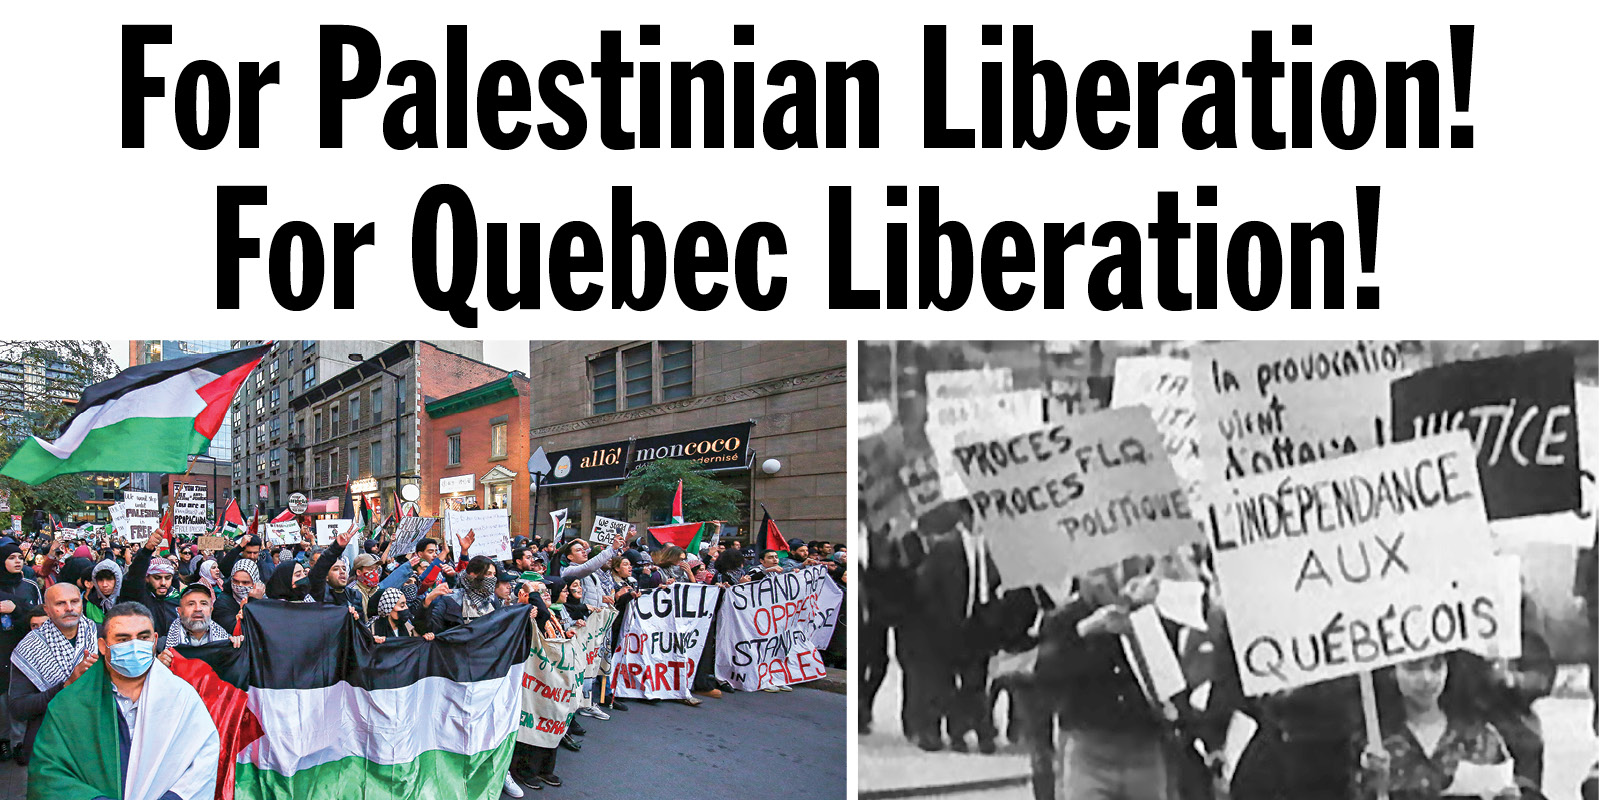 For Palestinian Liberation! For Quebec Liberation!